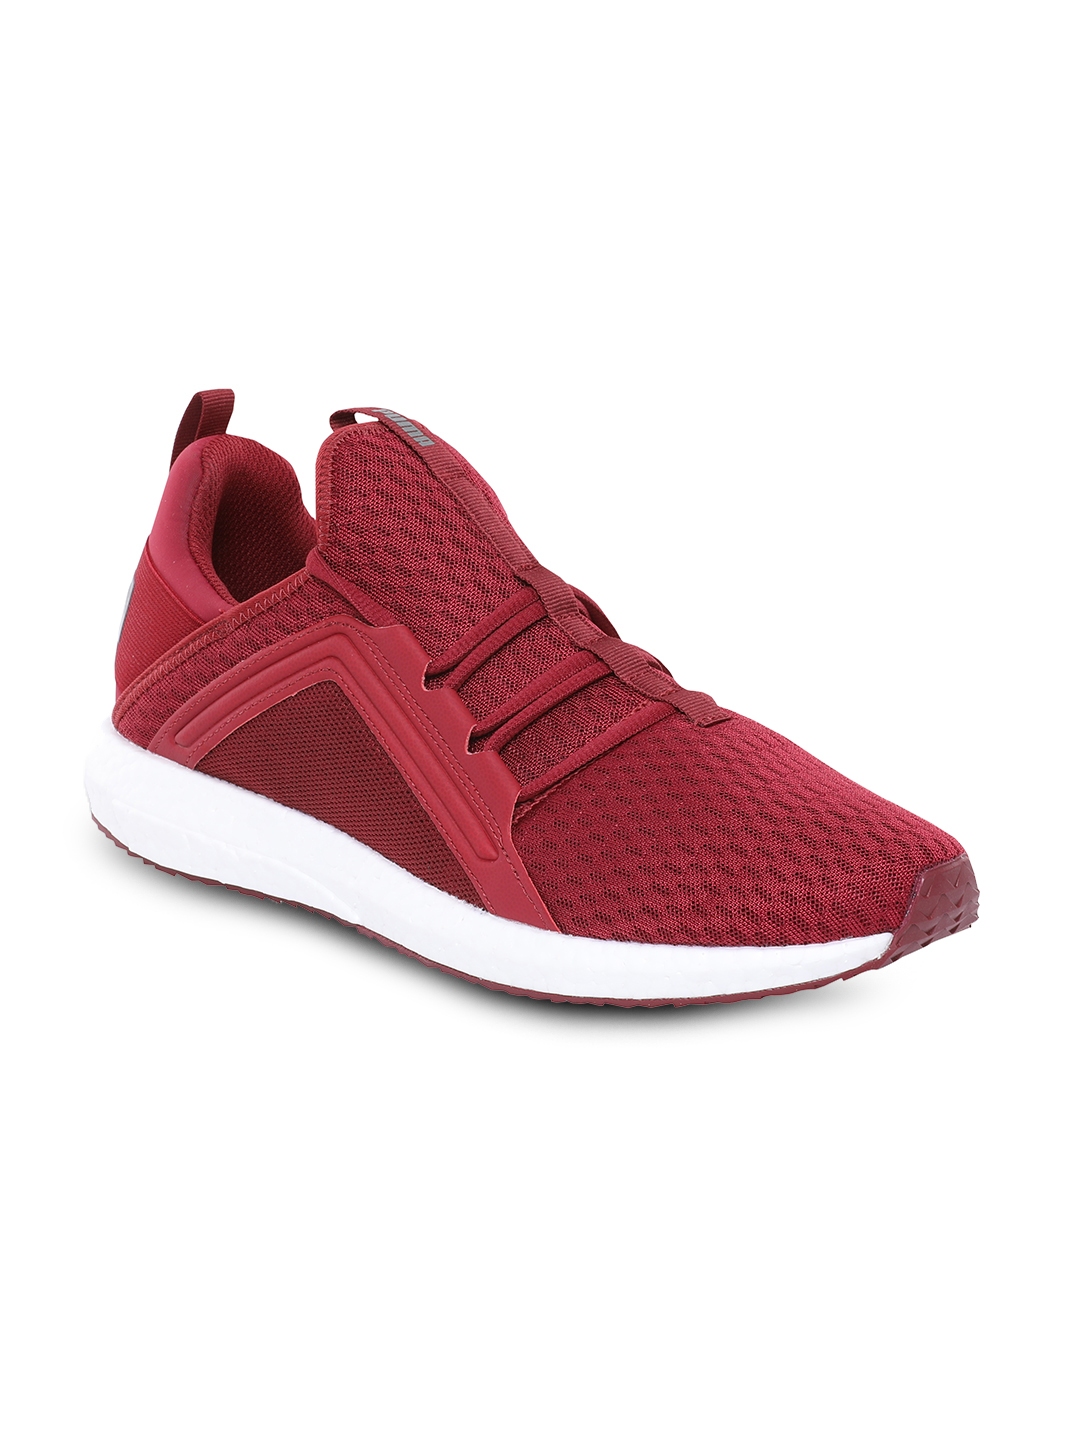 Buy Puma Men Maroon Running Shoes - Sports Shoes for Men 2346563 | Myntra